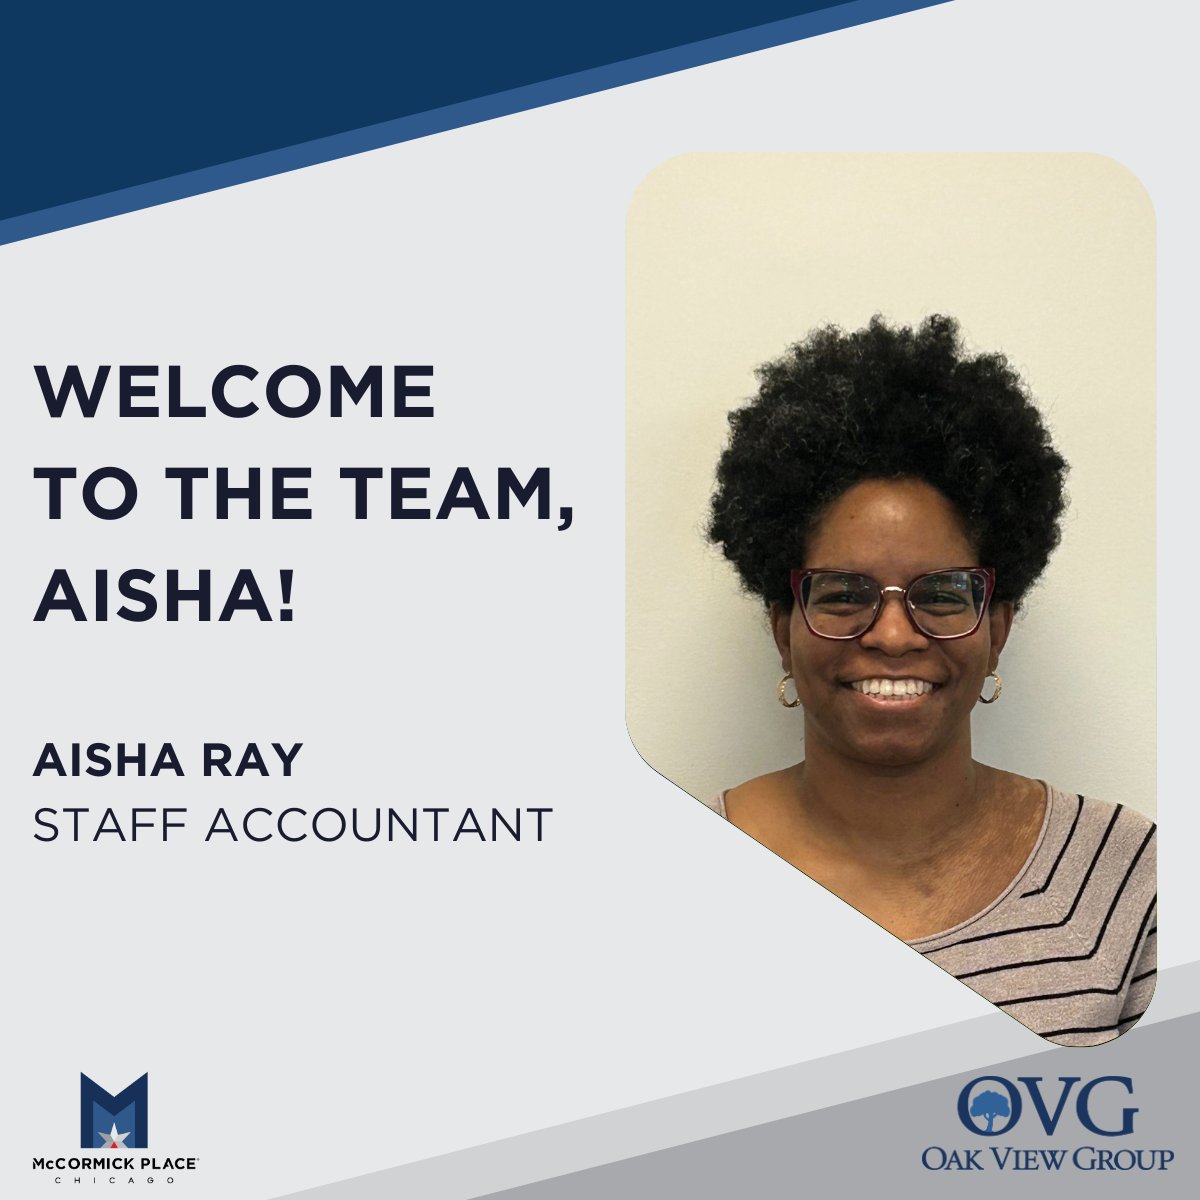 It's time for a mid-May #NewHireSpotlight! 🎉 

We are pleased to announce the following employees have recently joined @oakviewgroup at @McCormick_Place:

- Aisha Ray, Staff Accountant

Welcome! ⭐

#NewHires #ConventionCenter #OakViewGroup #McCormickPlace 

🧵 1/6